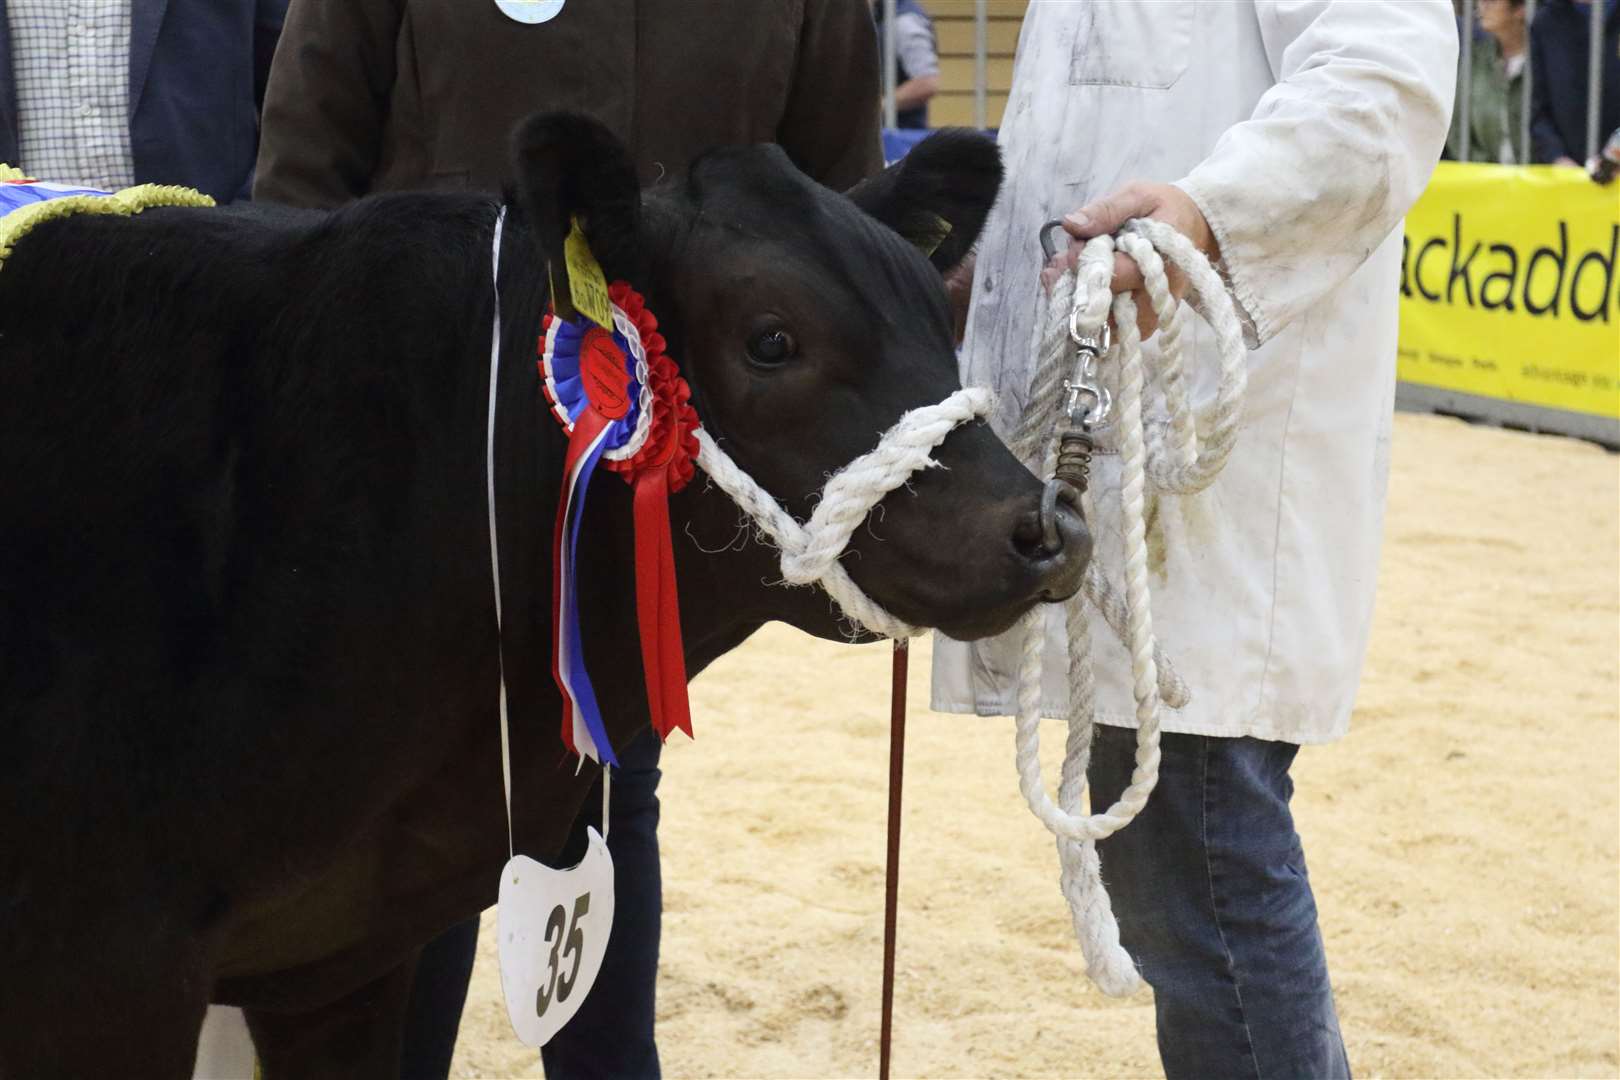 Thainstone Spectacular Champion, No35 a January 23 Bullock from J S Baillie, Tankerness, Picture. David Porter